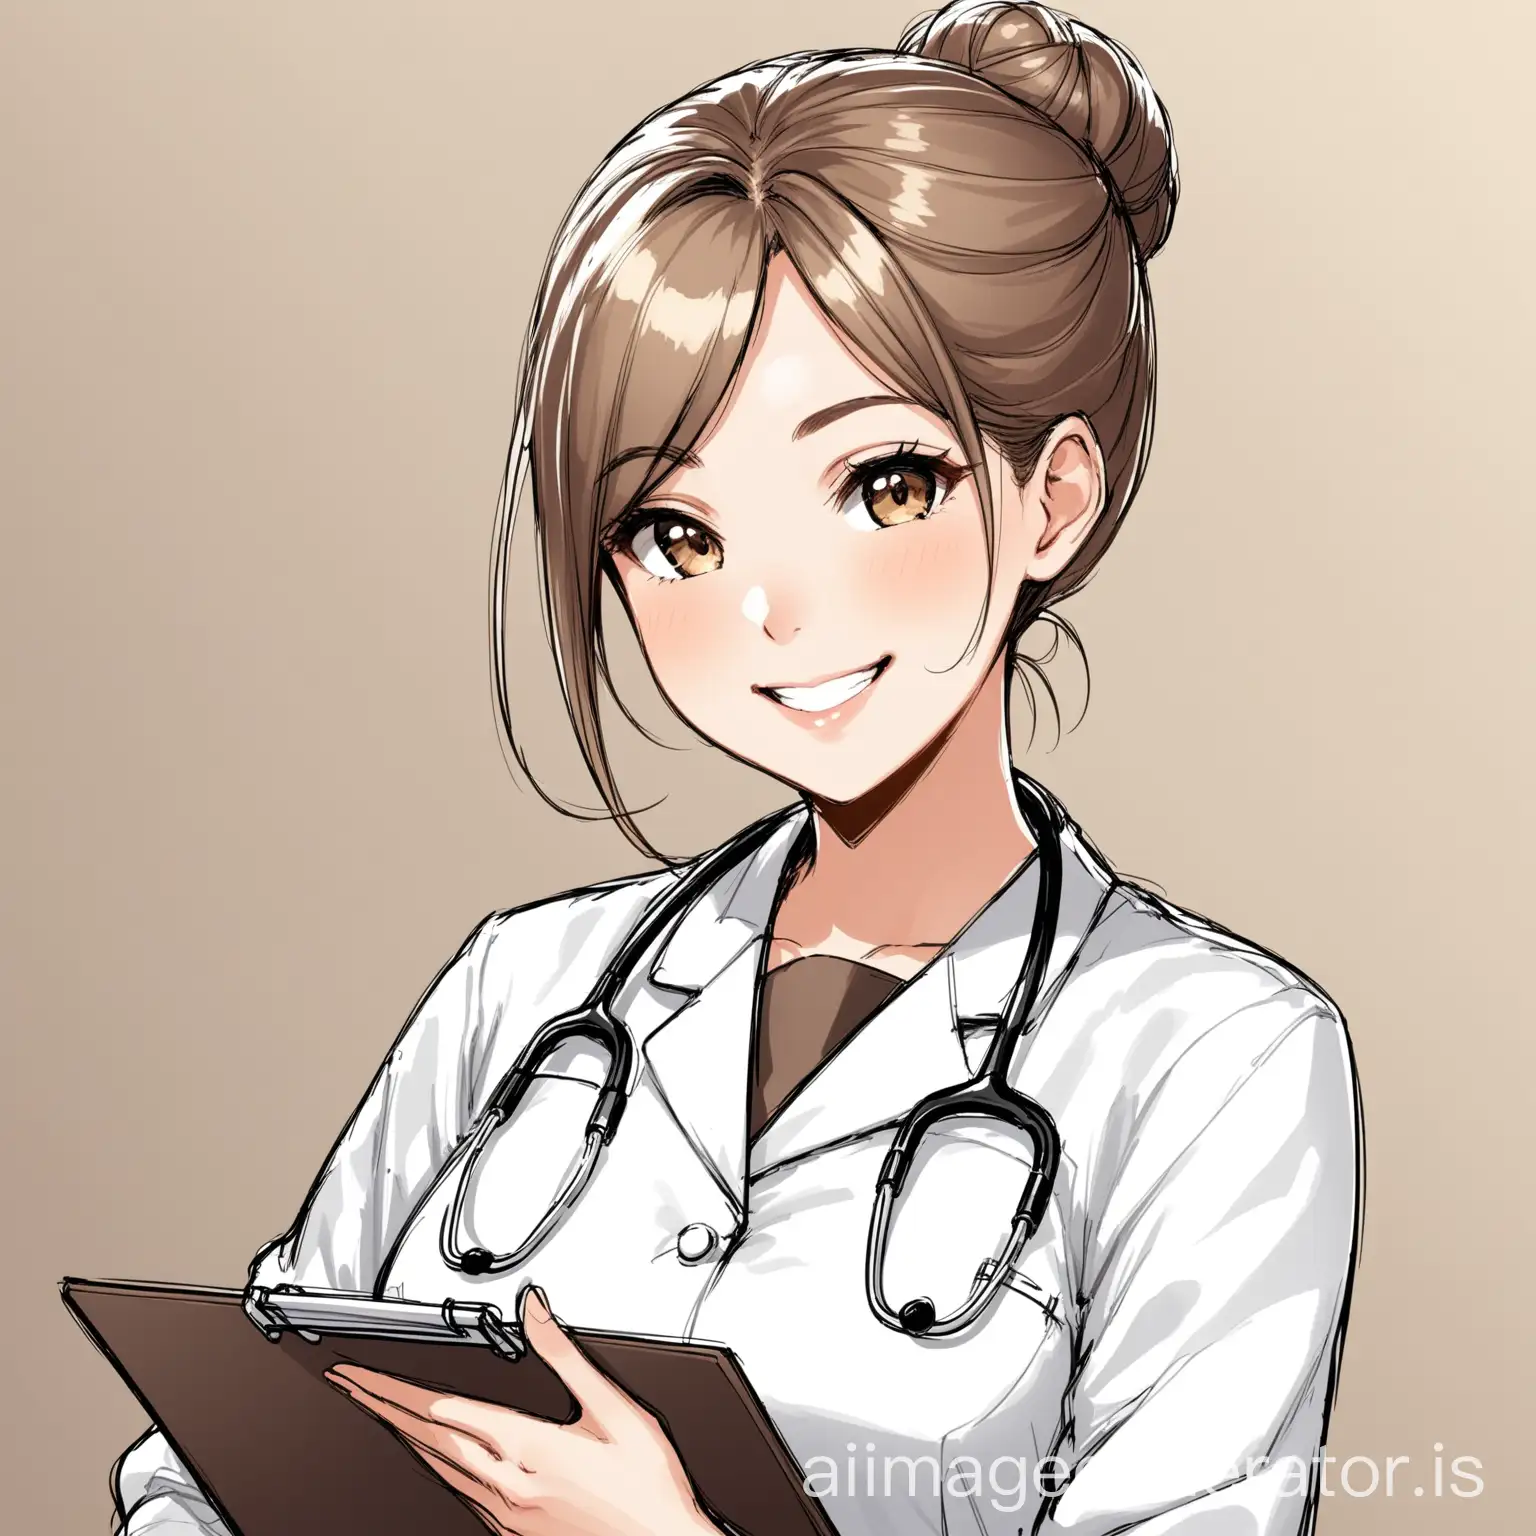 as a colorless sketch place this girl at a 45 degree angle with large breasts in a doctor's uniform holding a clipboard with her hair in a bun smiling. make it full frame 